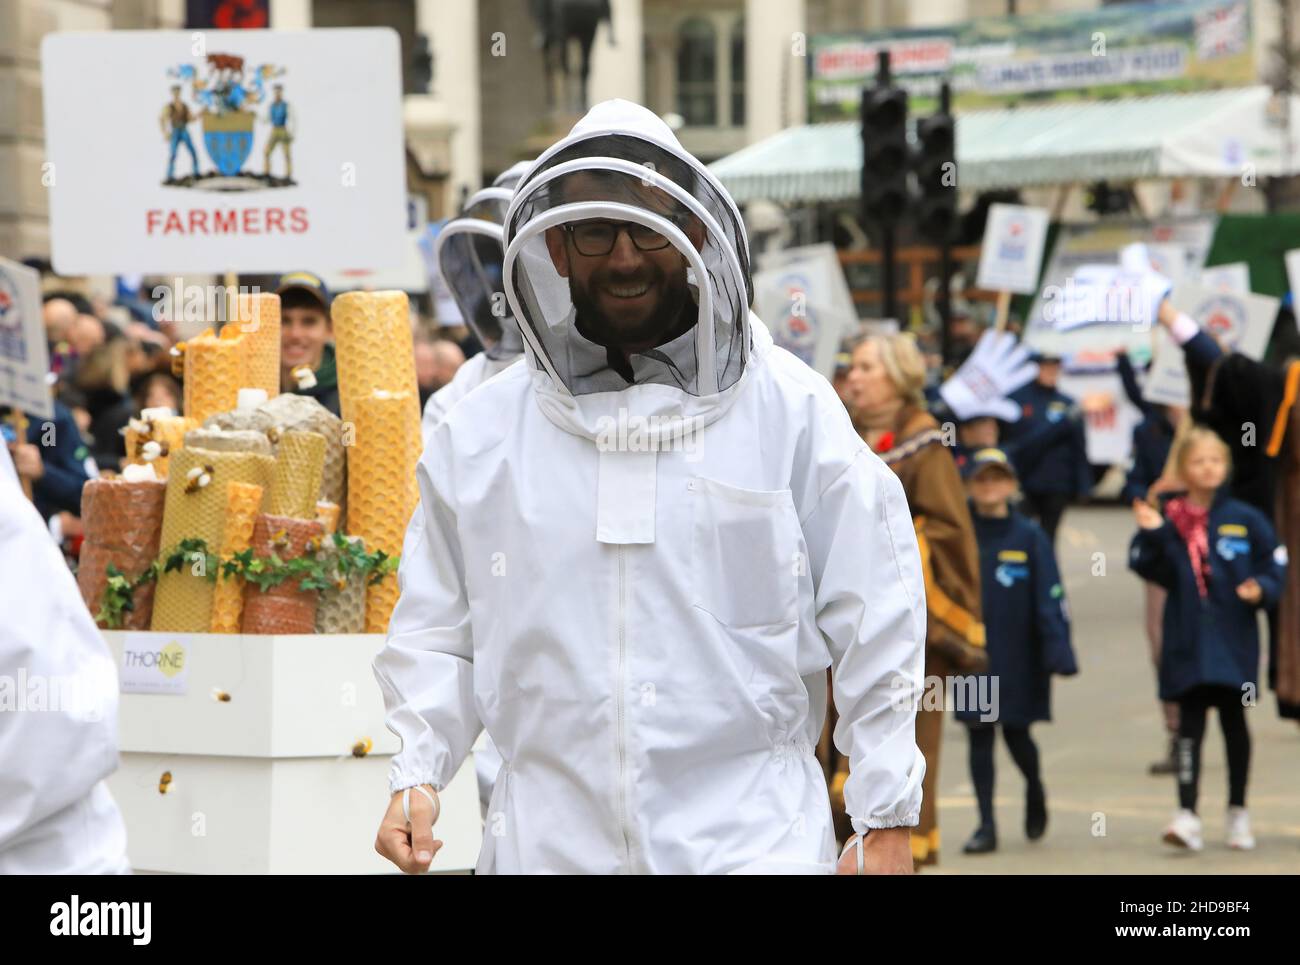 Bee keepers with the Worshipful Company of Farmers, taking part in the Lord Mayor's Show 2021 parade, in the heart of the City of London, UK Stock Photo